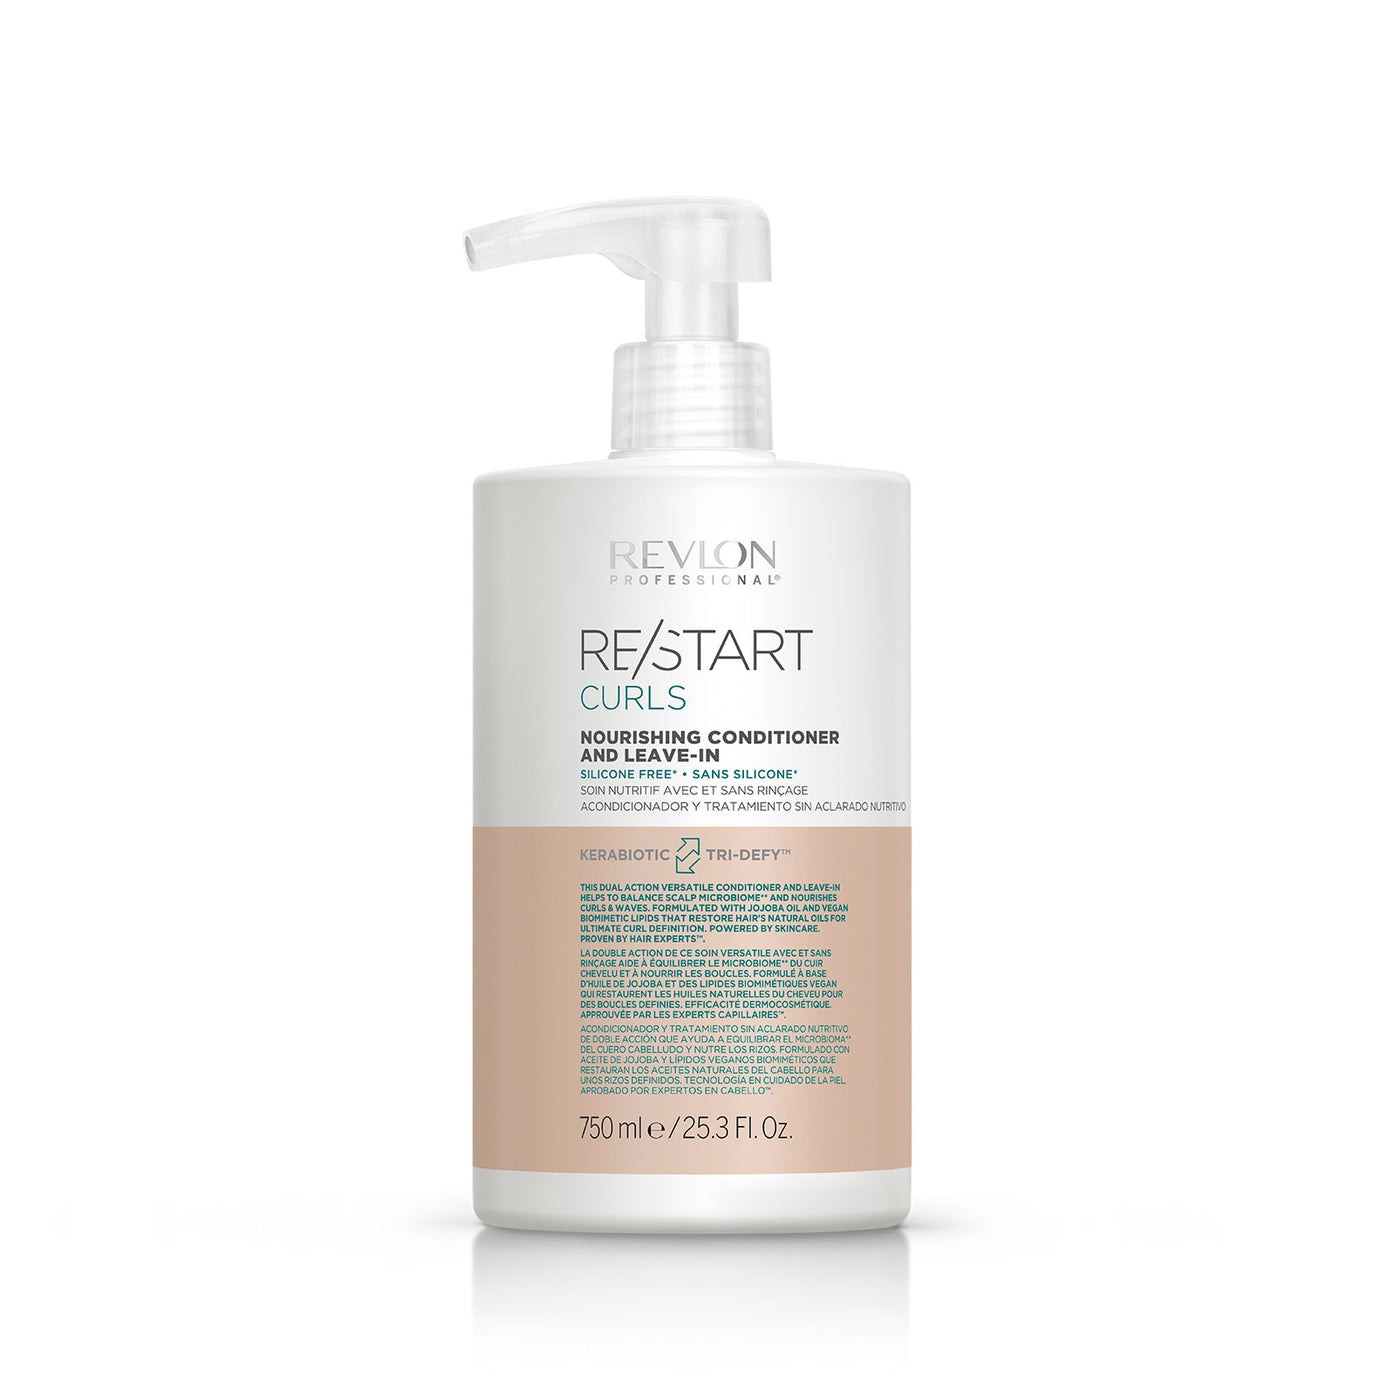 RE/START CURLS NOURISHING CONDITIONER AND LEAVE-IN - 200 ML